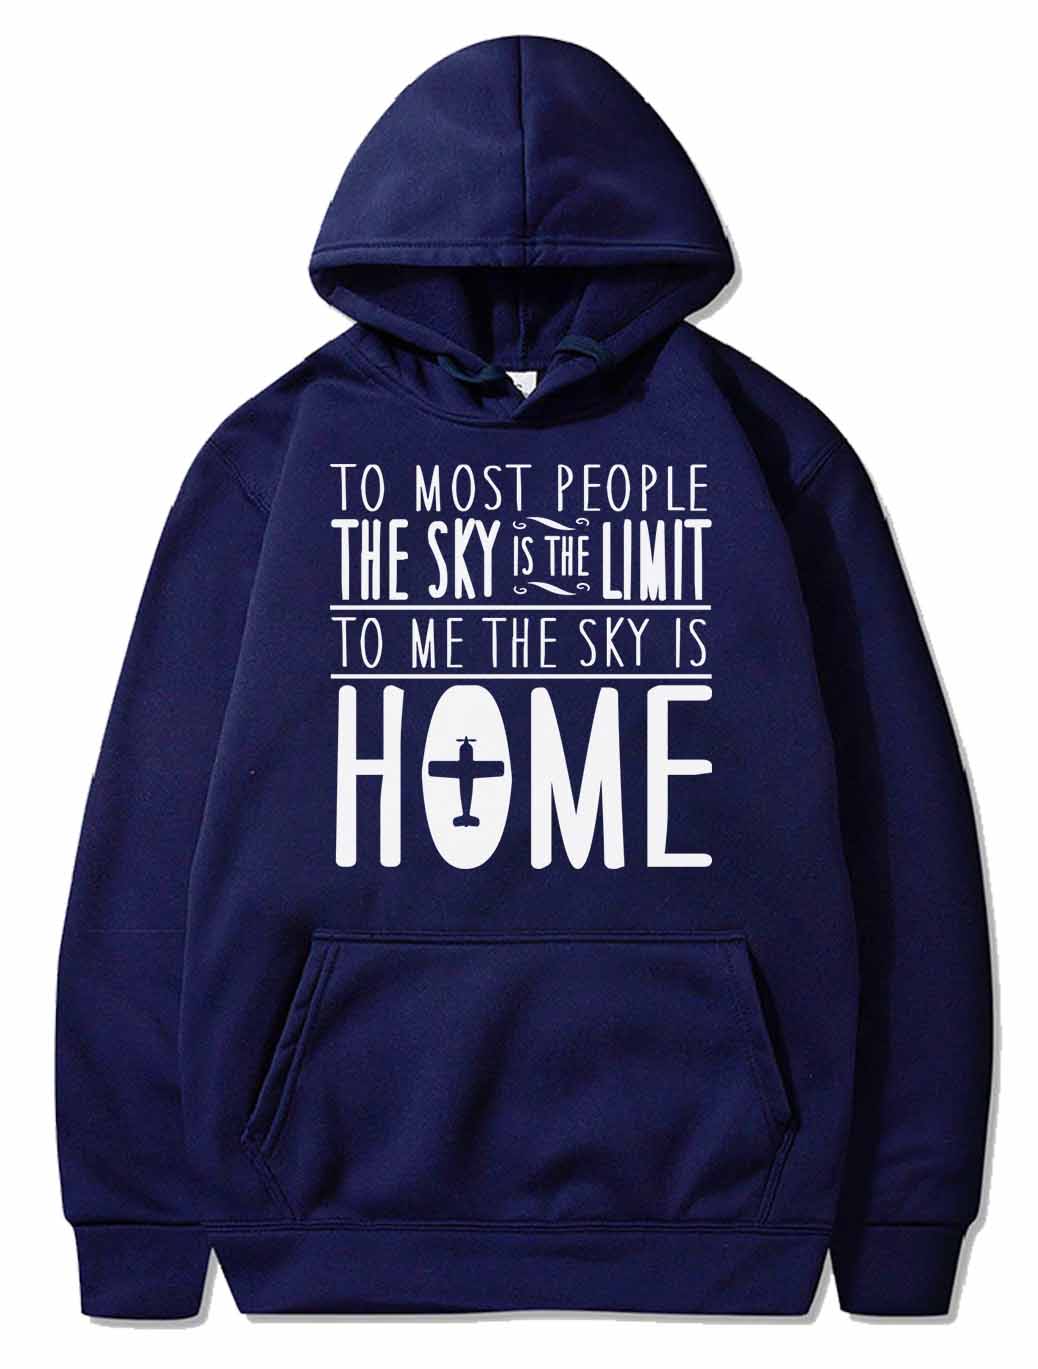 15_sky is home, not the limit_ PULLOVER THE AV8R